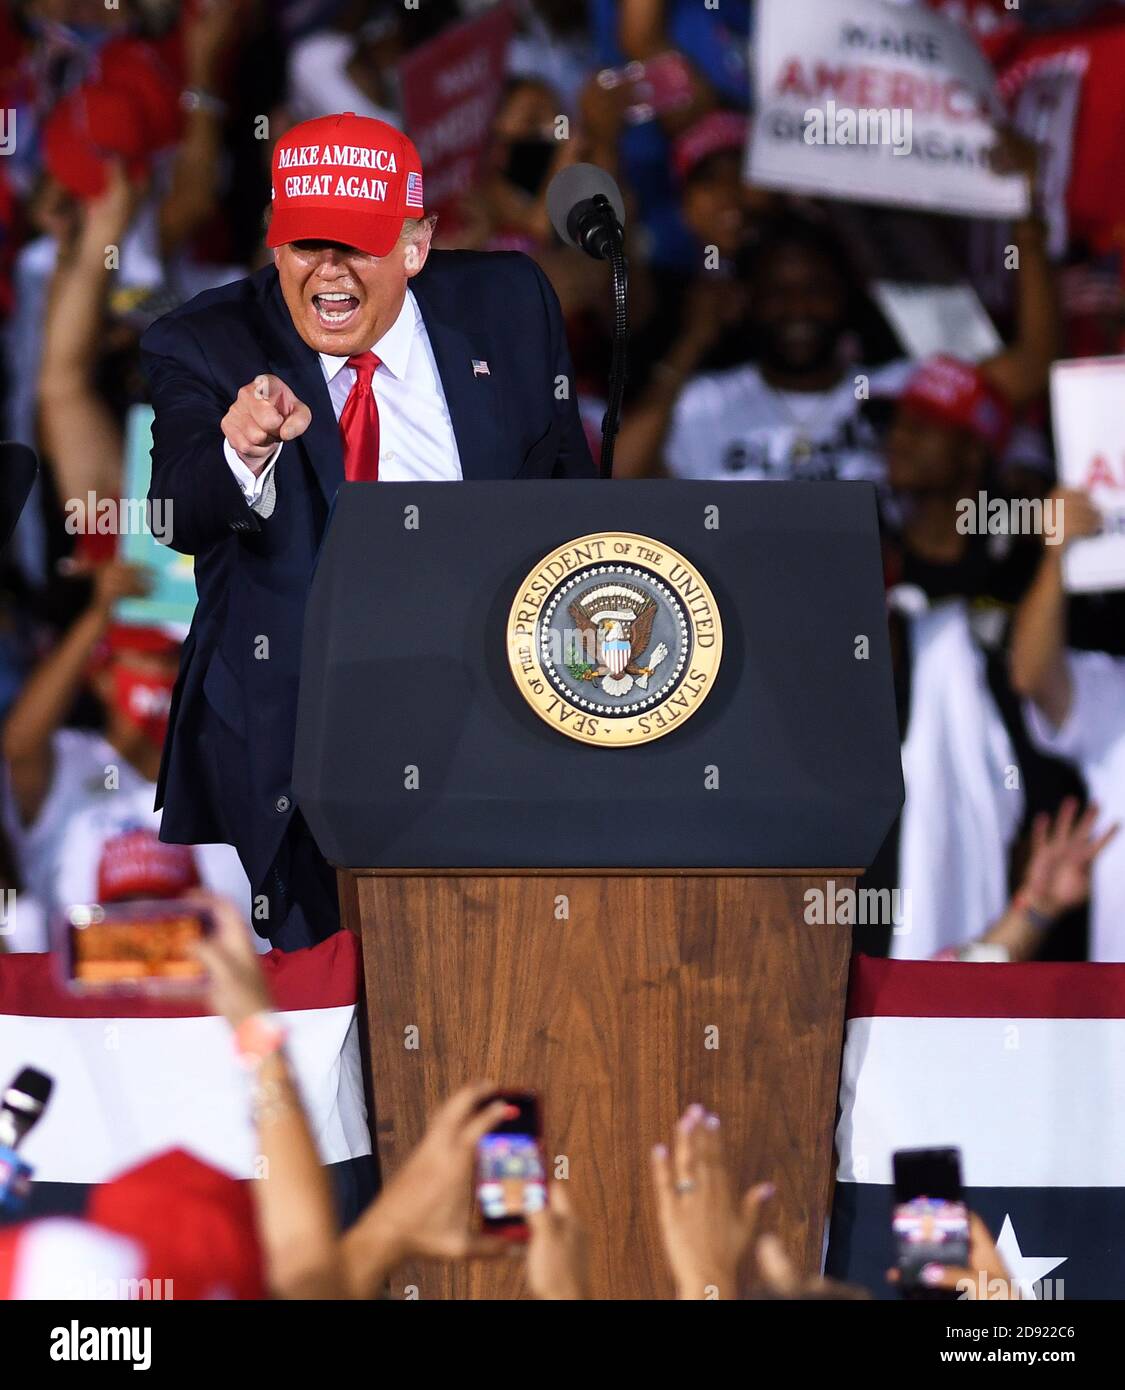 Opa Locka, United States. 01st Nov, 2020. November 1, 2020 - Opa-Locka, Florida, United States - U.S. President Donald Trump gestures as he speaks at a campaign rally at Miami-Opa Locka Executive Airport on November 1, 2020 in Opa-Locka, Florida. President Trump held events in five states today, as he continues his campaign against Democratic presidential nominee Joe Biden two days before the November 3 election. Credit: Paul Hennessy/Alamy Live News Stock Photo